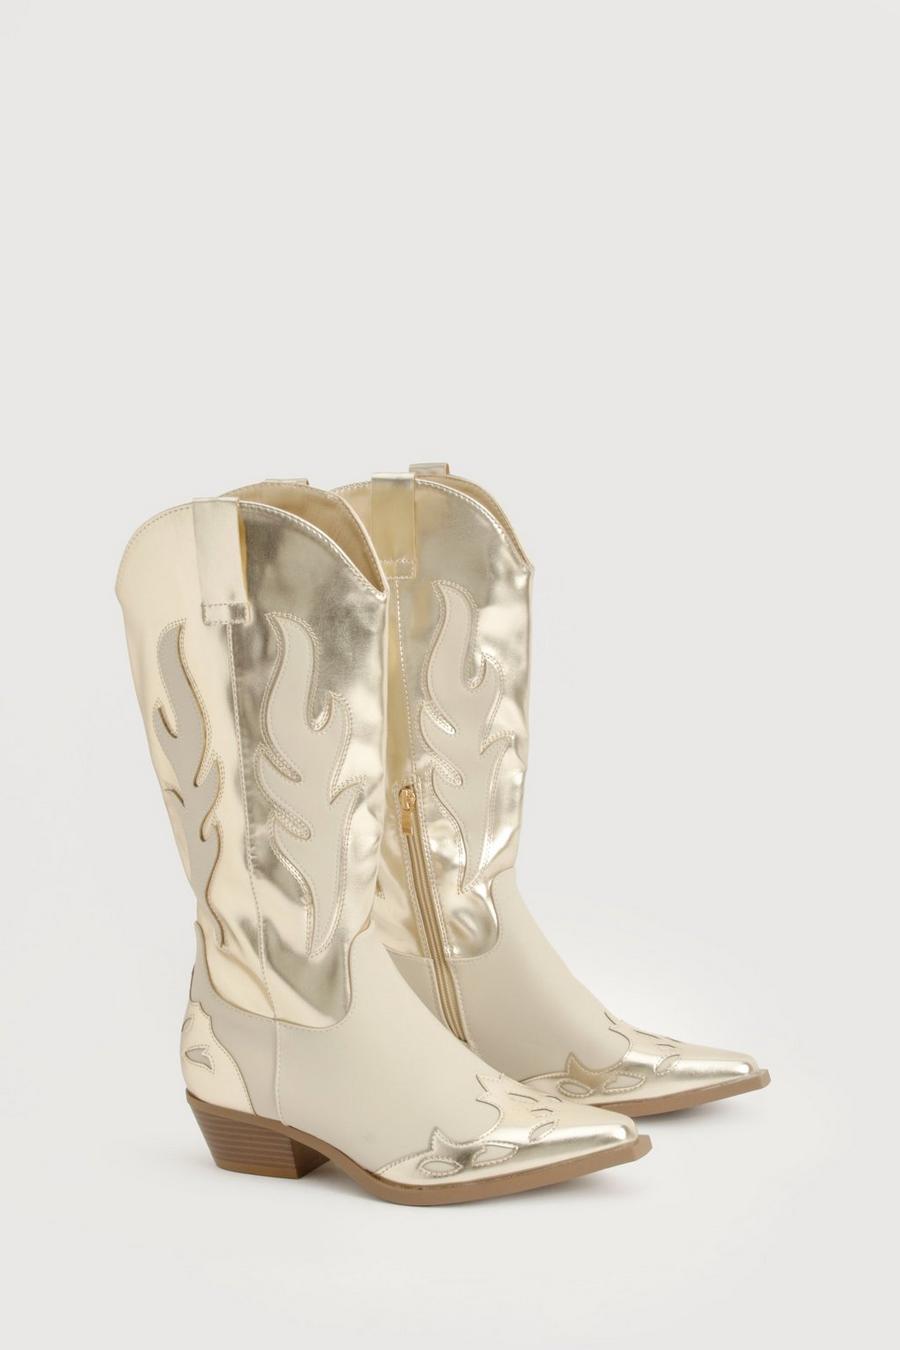 Gold Metallic Contrast Panel Western Cowboy Boots   